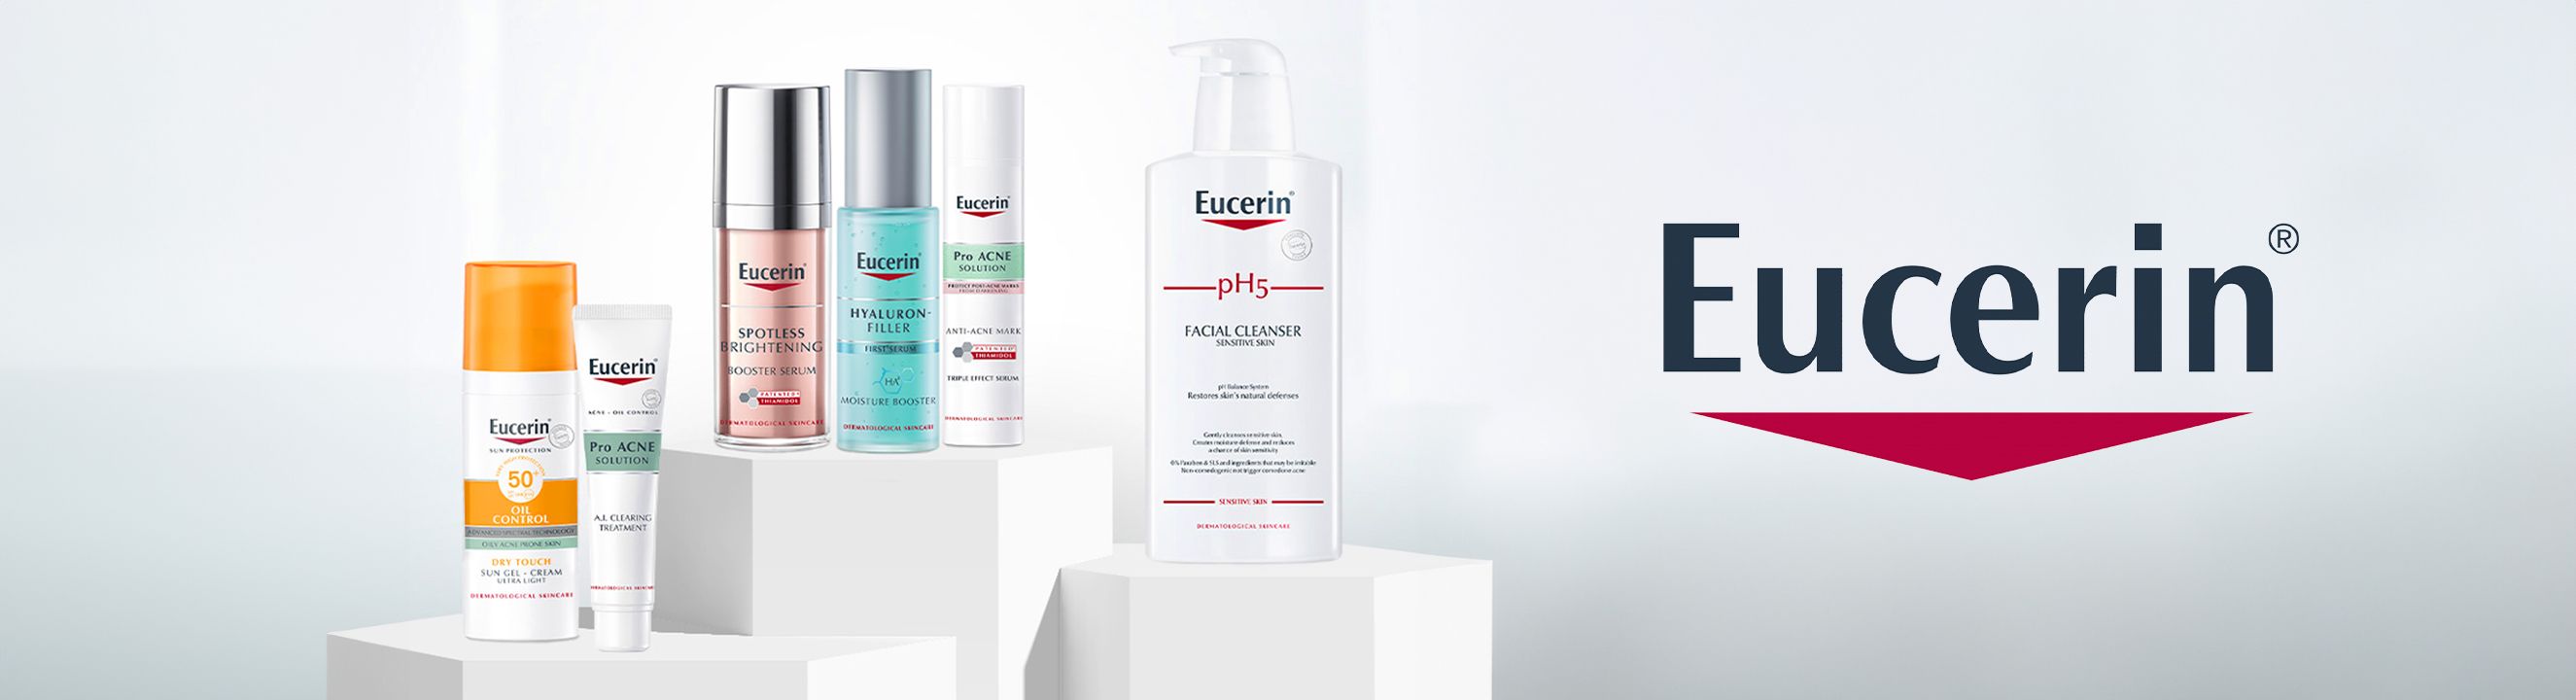 eucerin-collection